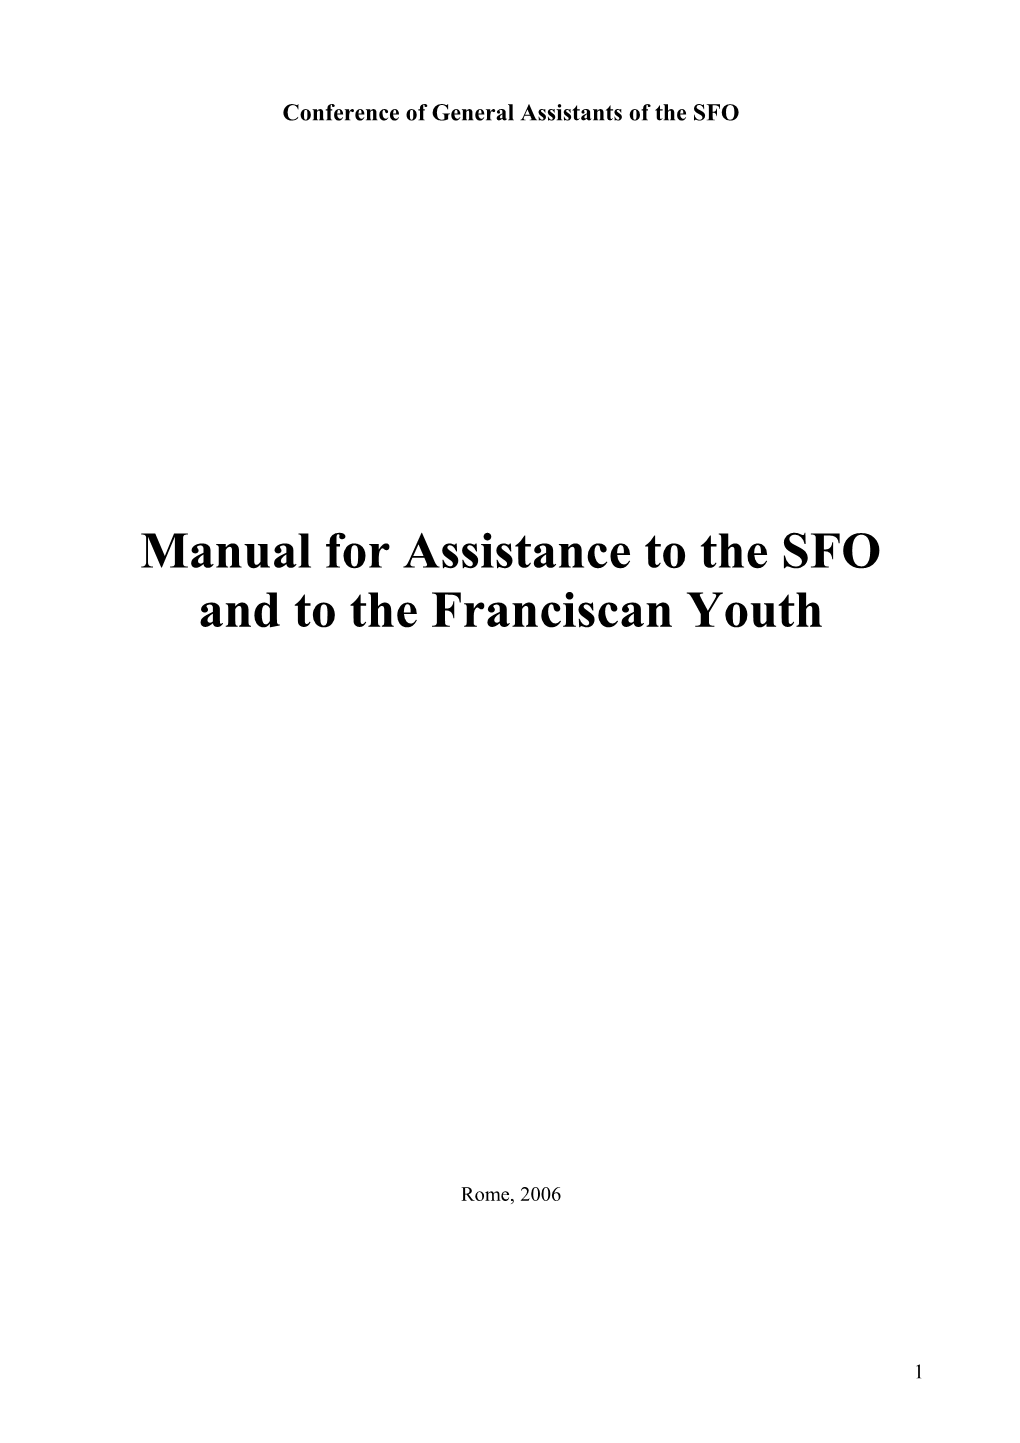 Conference of General Assistants of the SFO